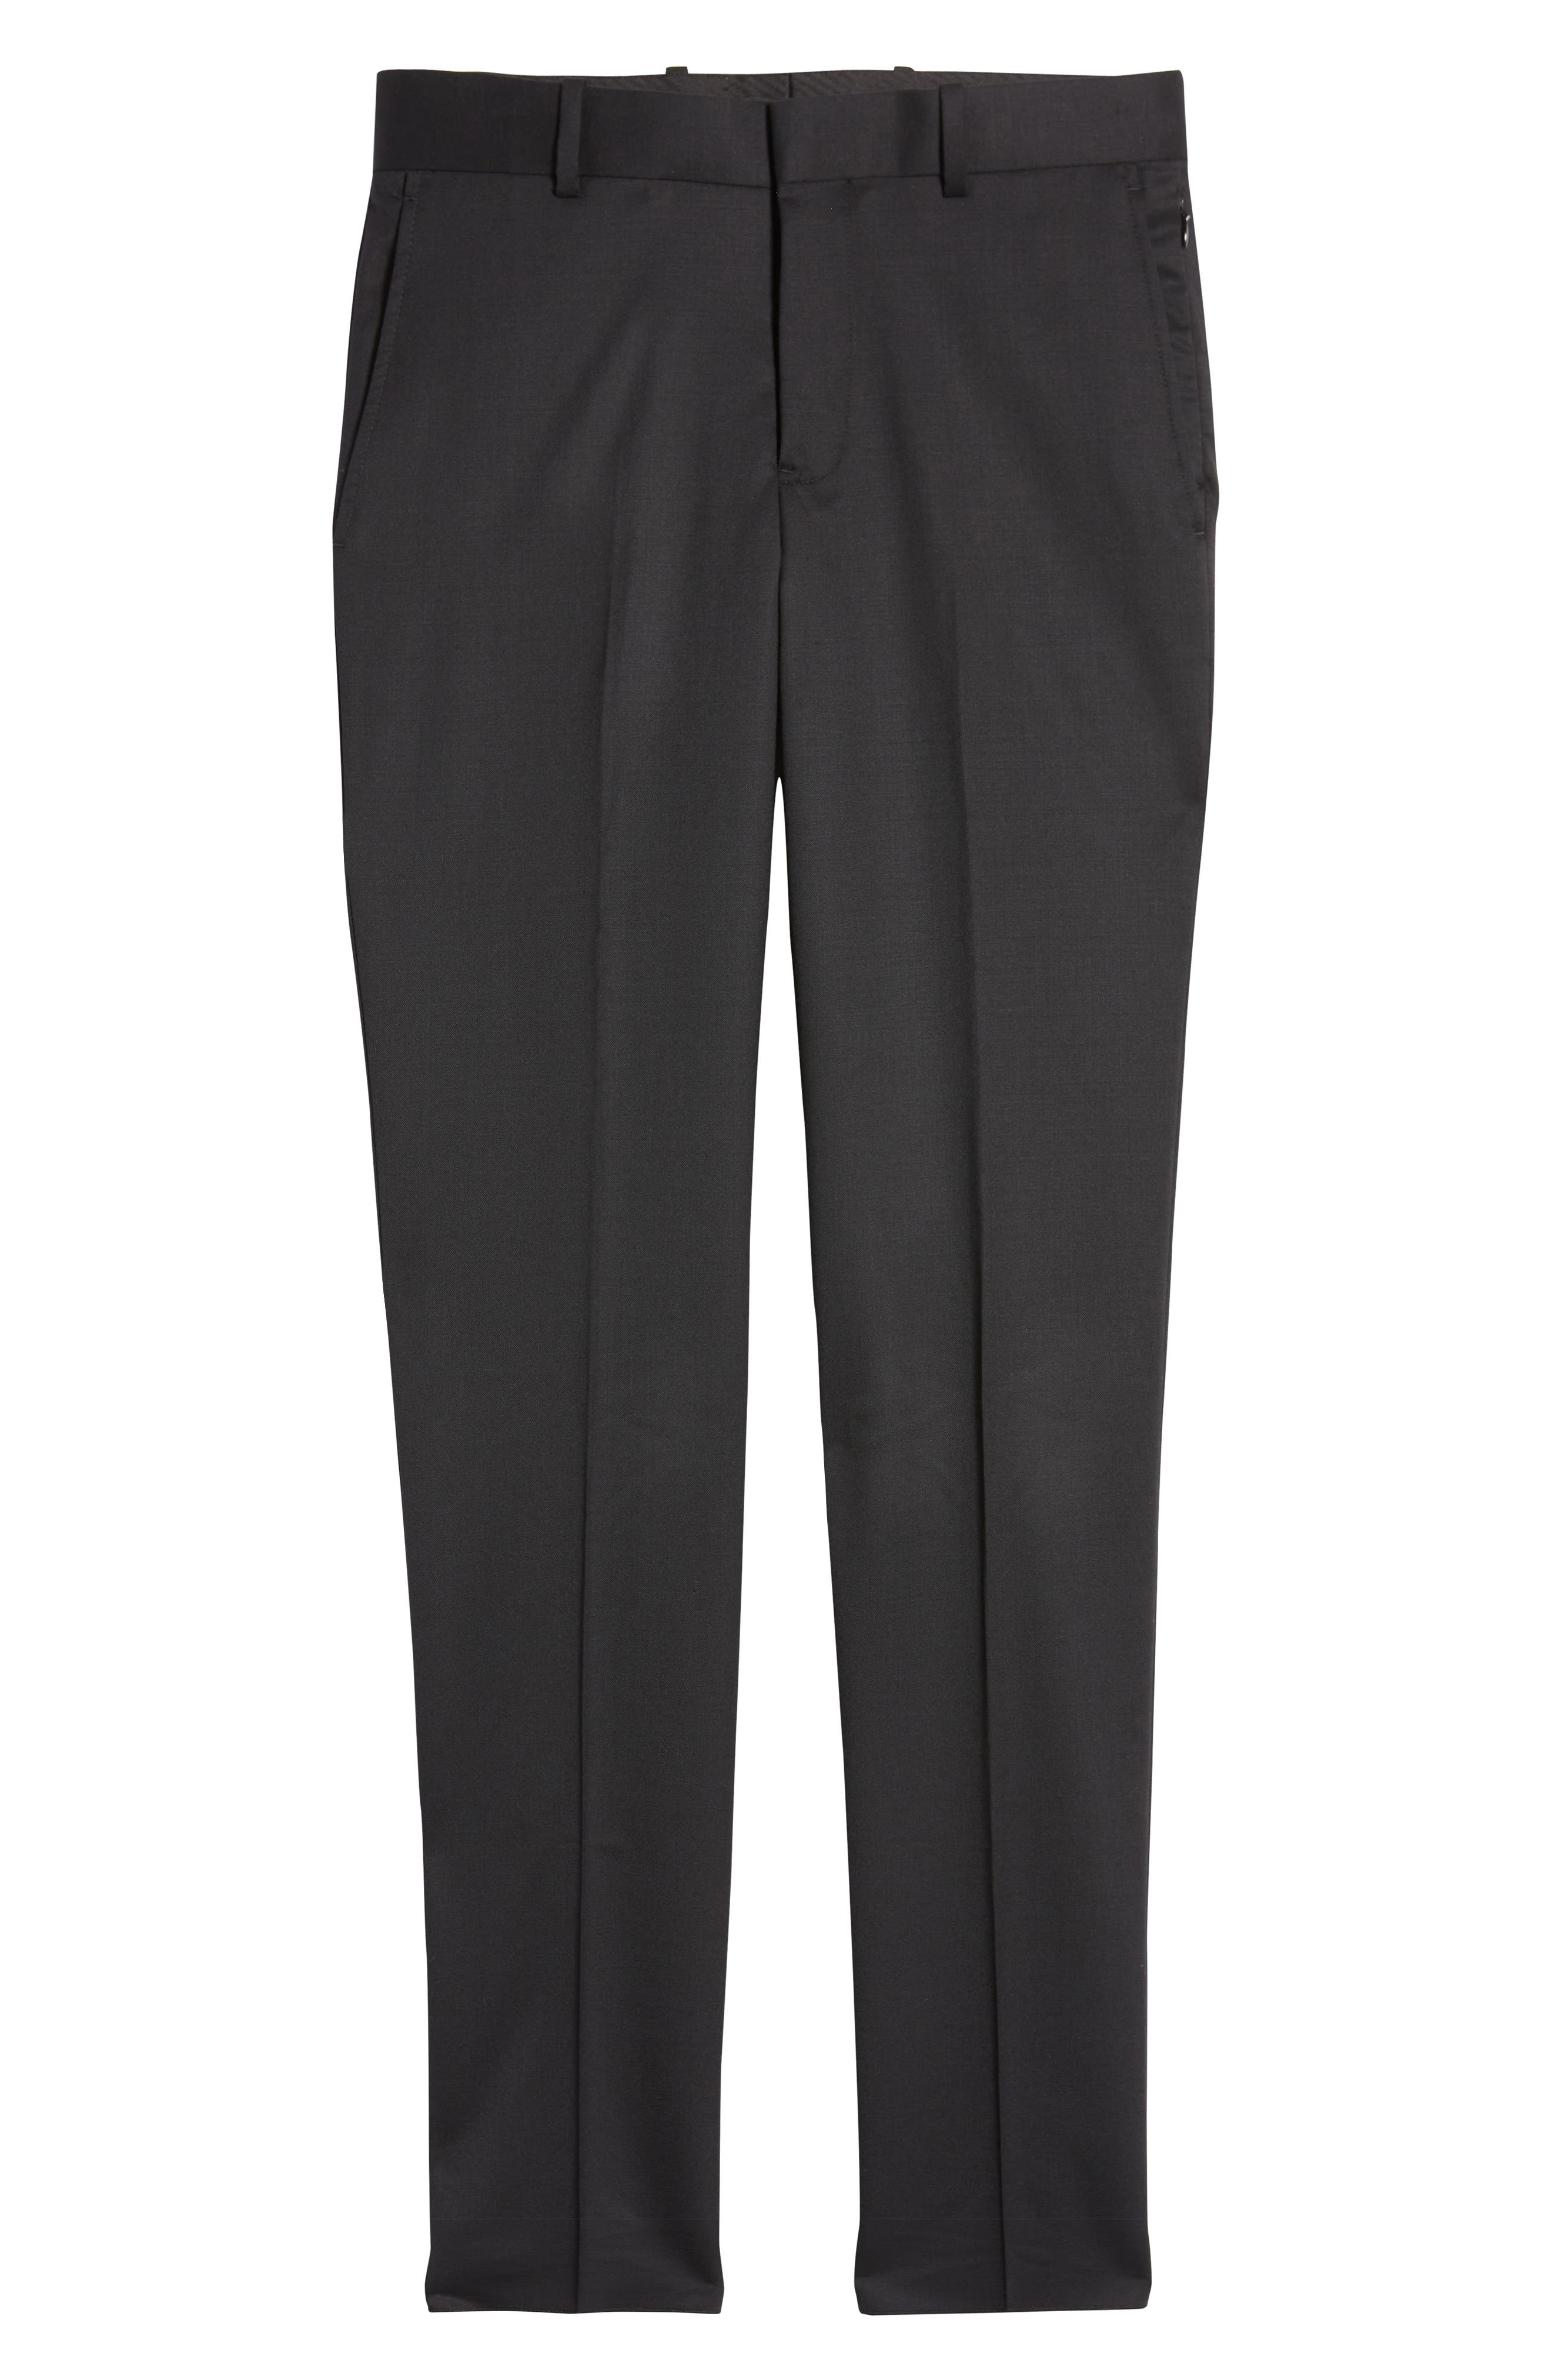 Slacks and Chinos Casual trousers and trousers Ermenegildo Zegna Wool Pants in Grey for Men Grey Mens Clothing Trousers 